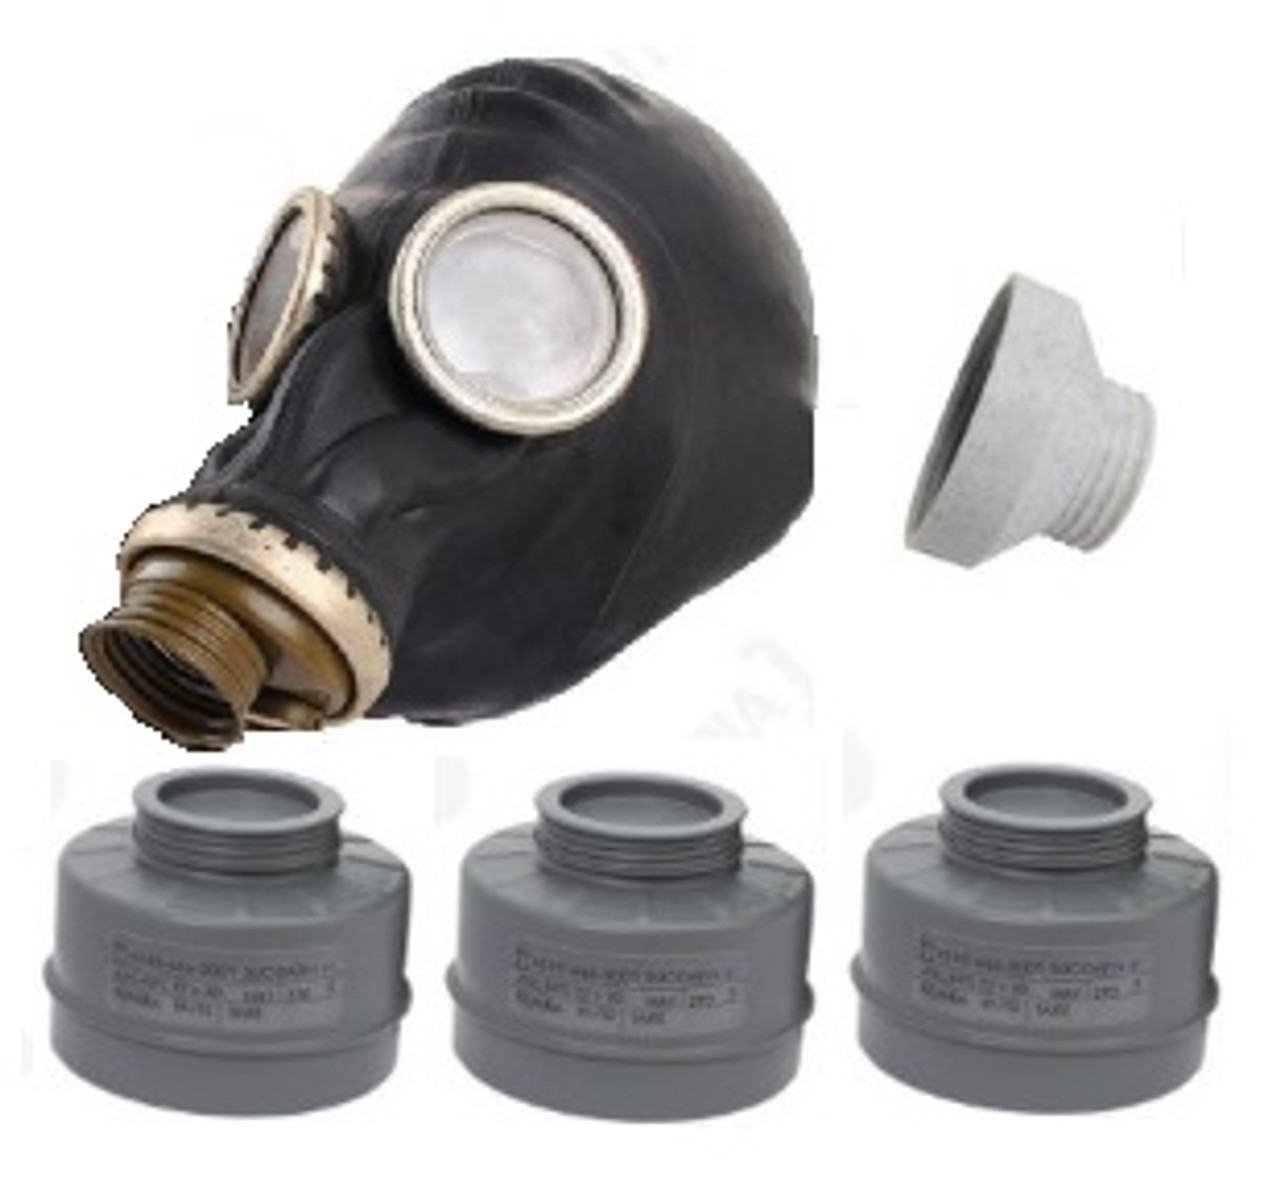 Genuine  Russian Gas Mask With 3 Finnish Filters & Carry Bag